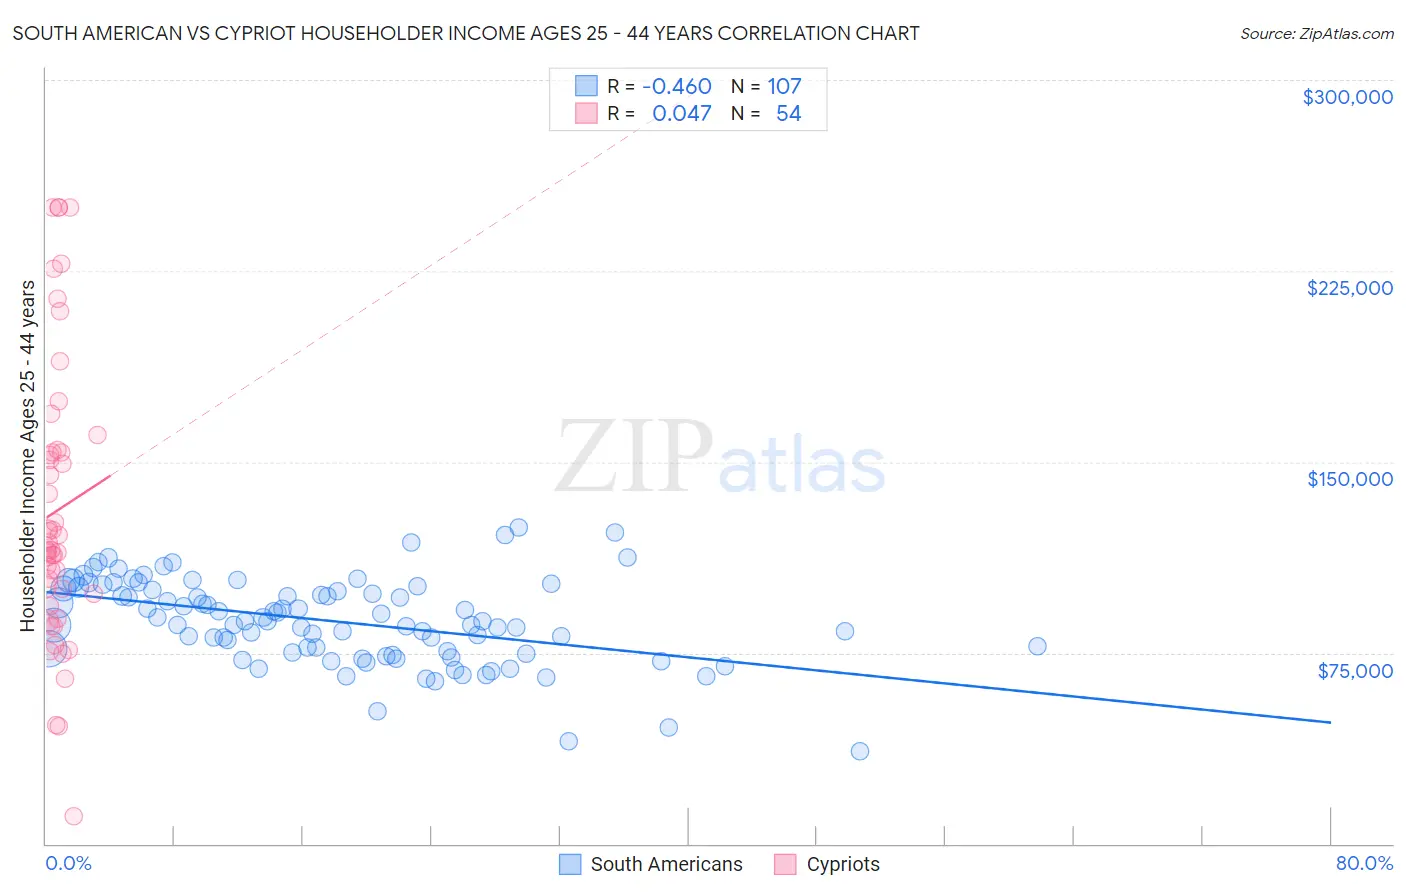 South American vs Cypriot Householder Income Ages 25 - 44 years